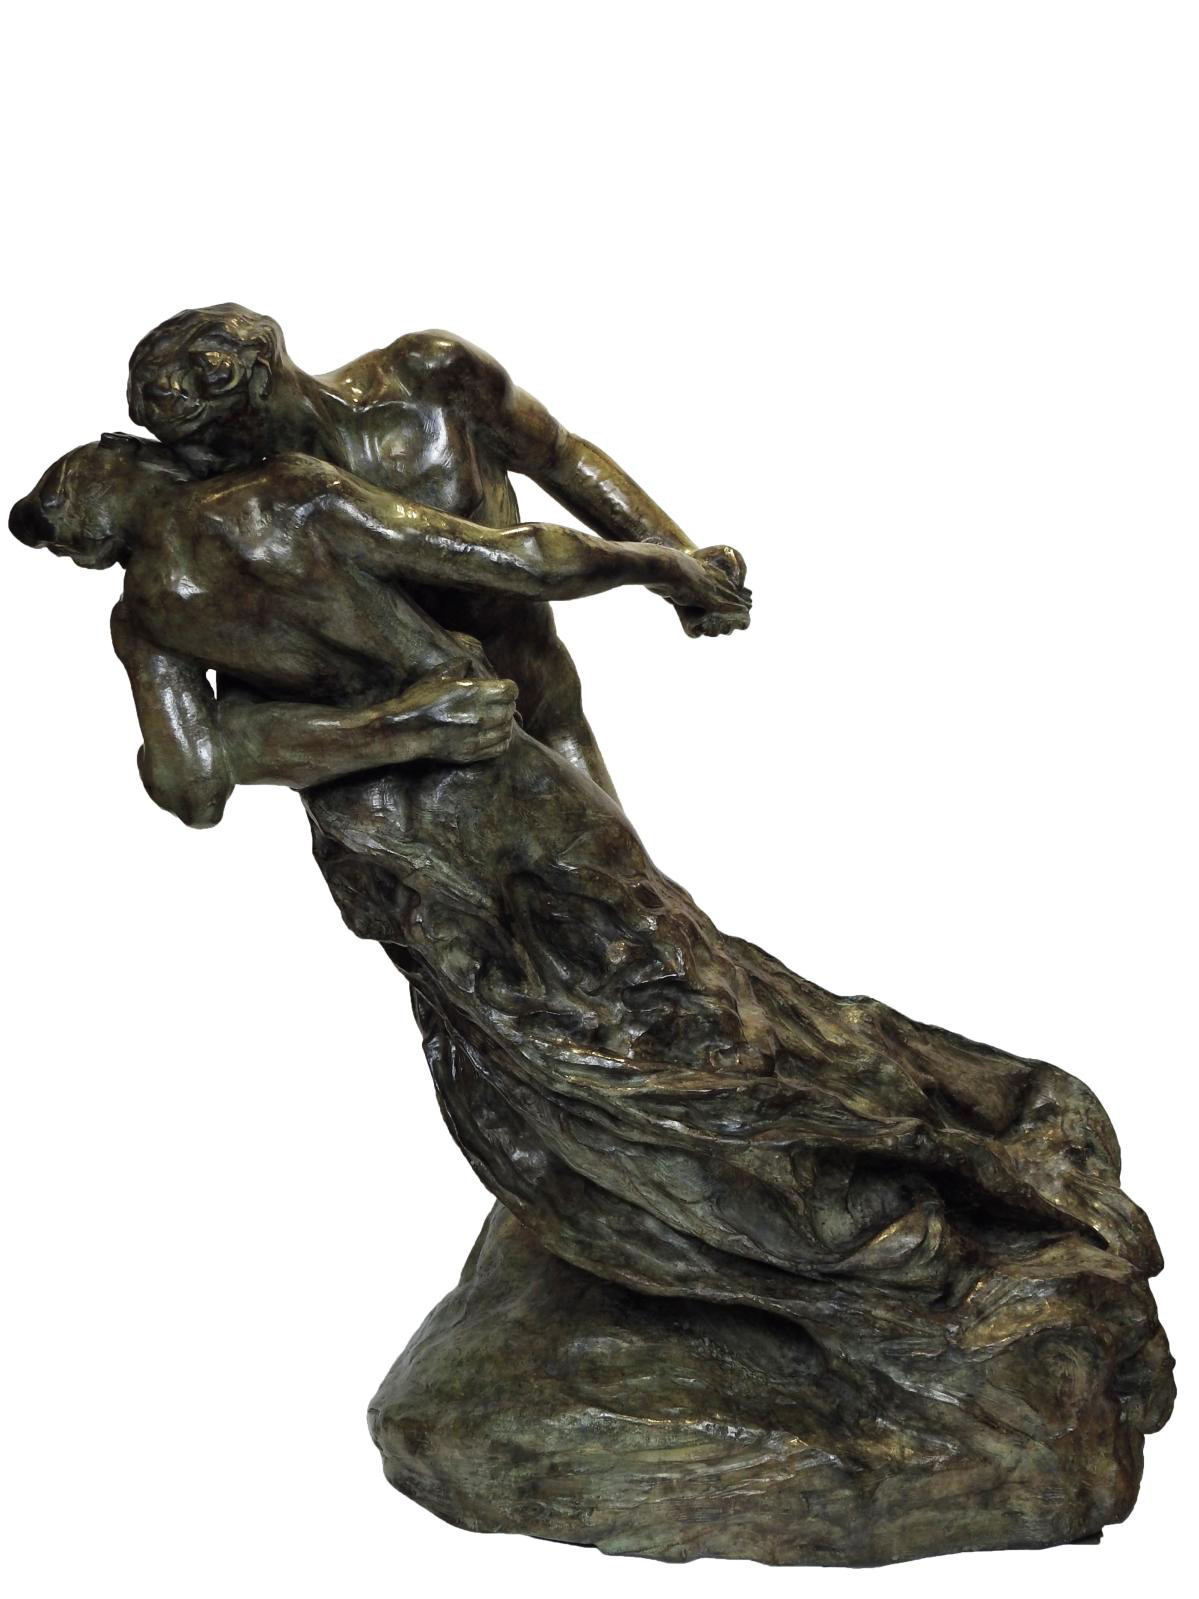 The Waltz of Sculptures, from the 18th Century to Camille Claudel